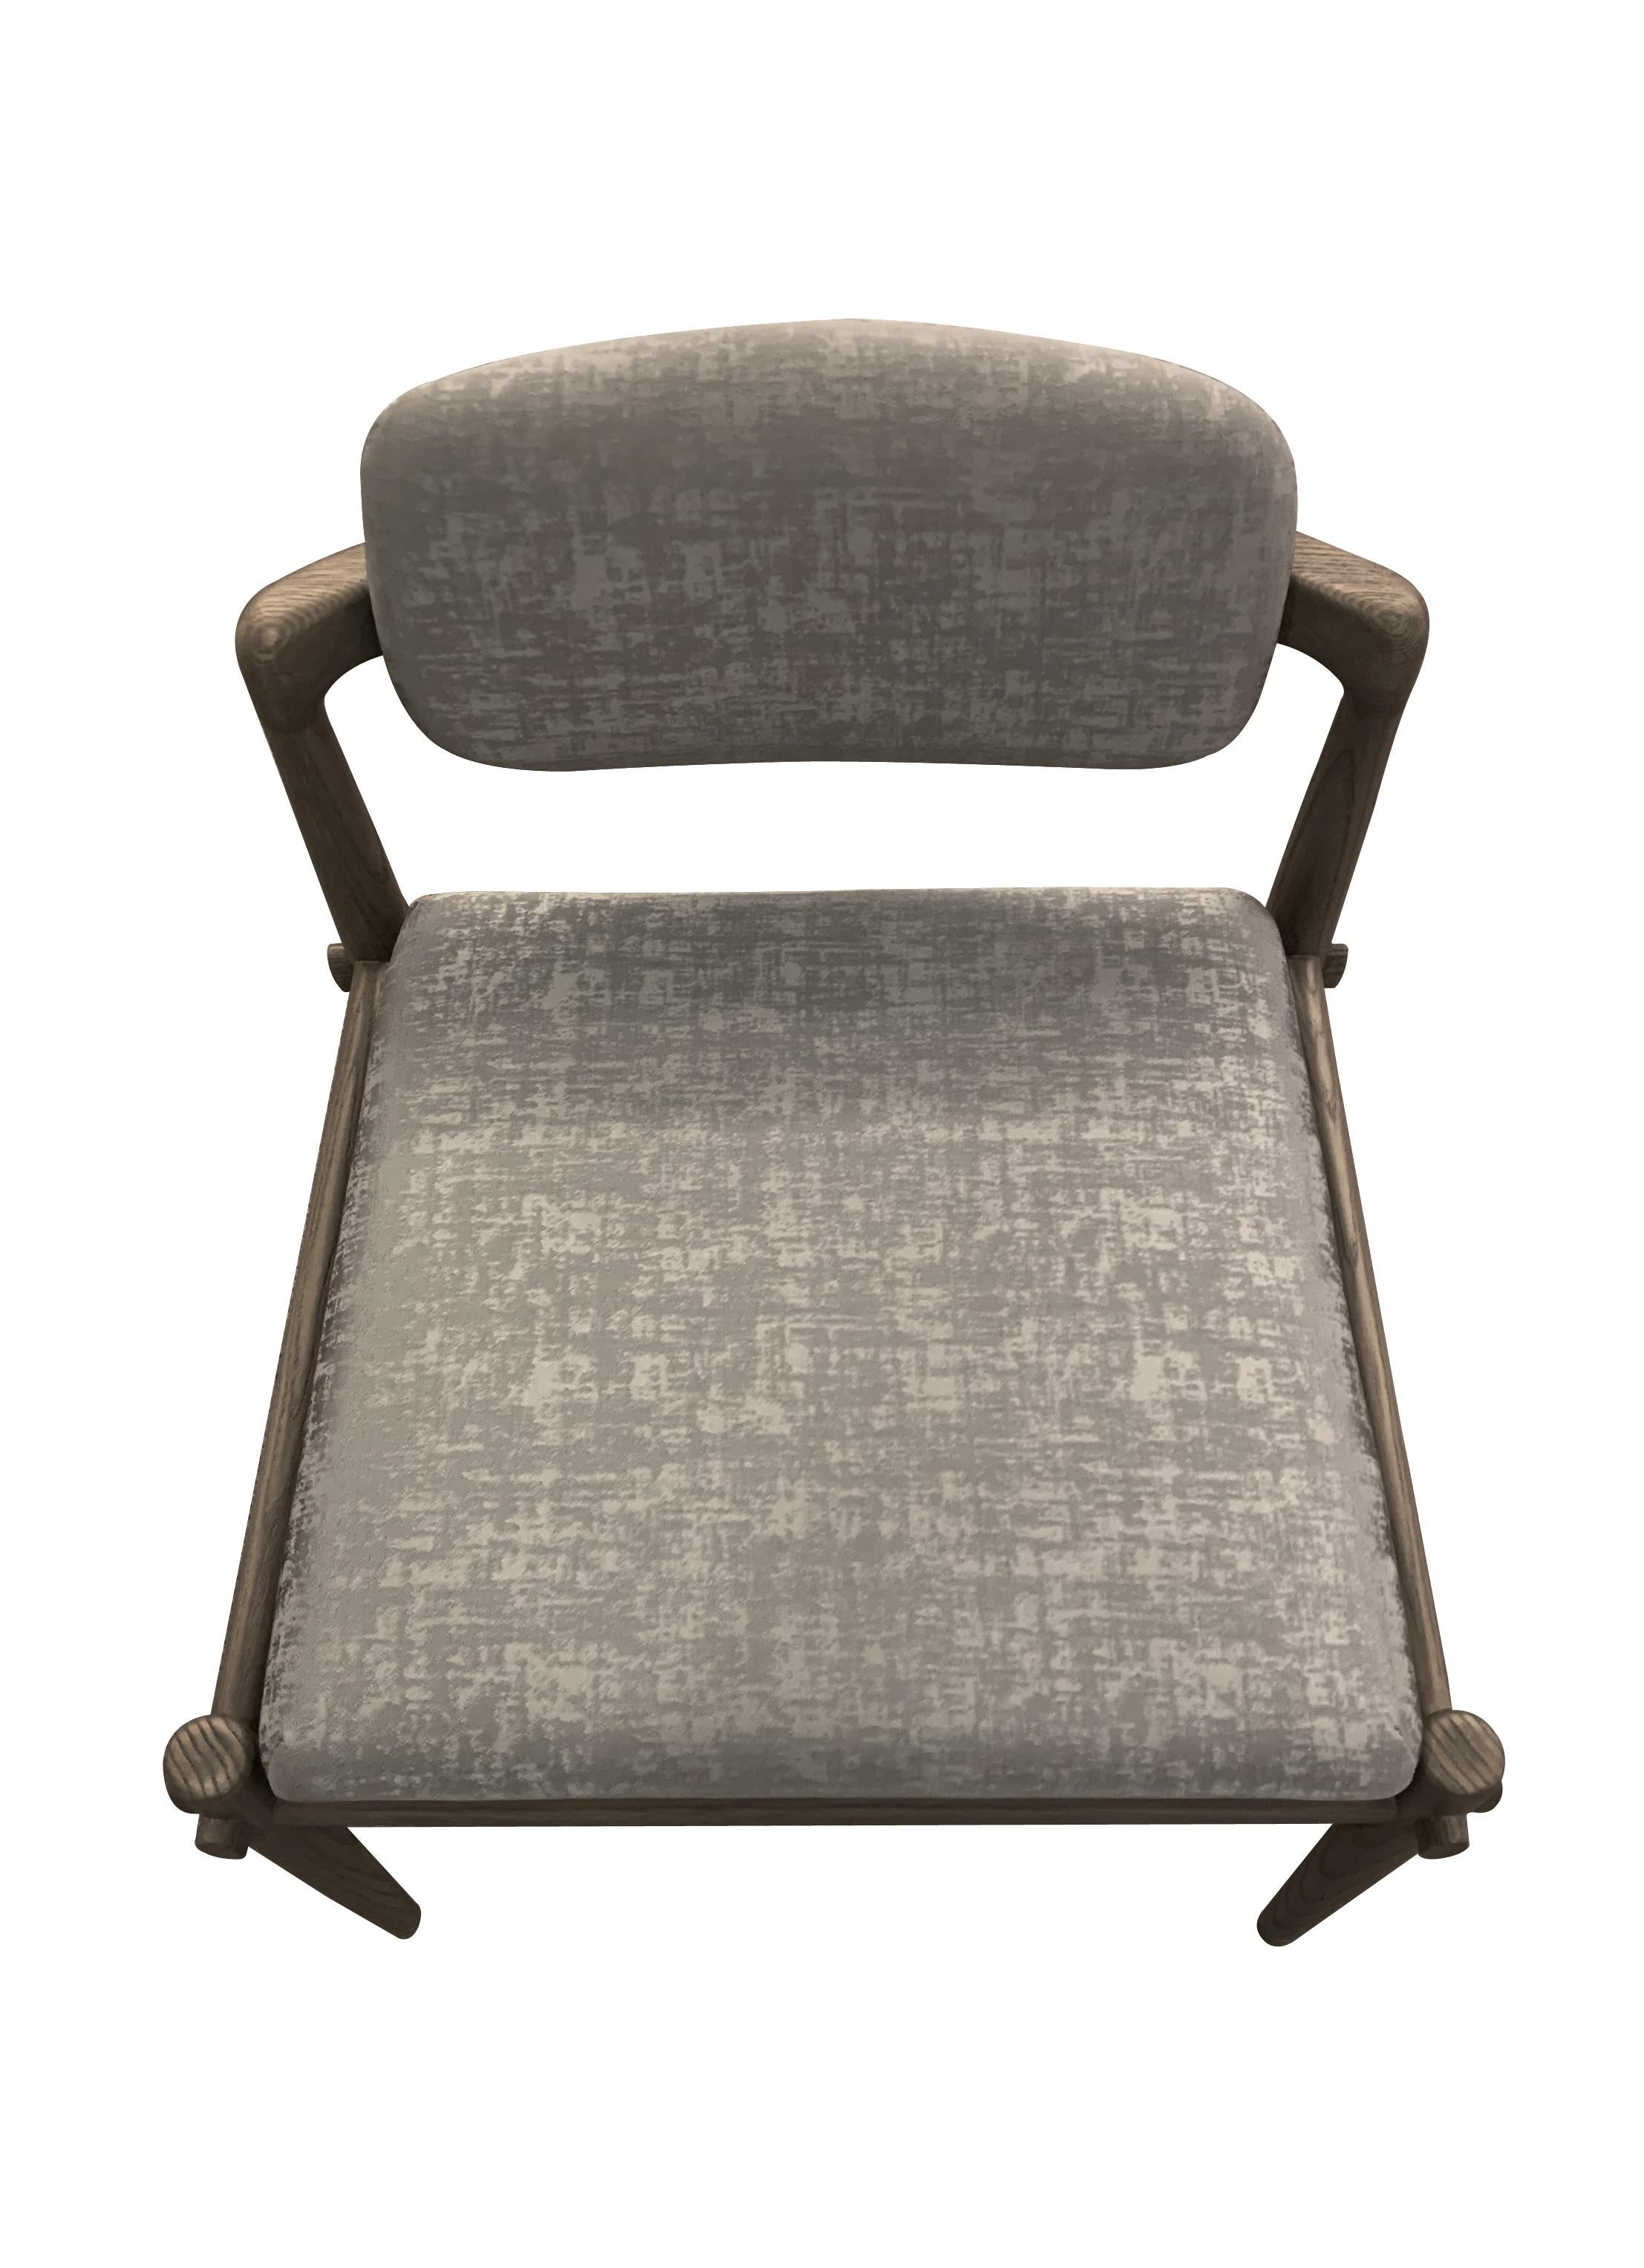 Description: Dressing chair
Color: Grey and travertine grey
Size: 58 x 49 x 60 H cm
Material: Oak and fabric
Collection: Interlock

Dressing chair, grey oak wood upholstered with travertine grey fabric.
Solid oak and handmade.
Available upon